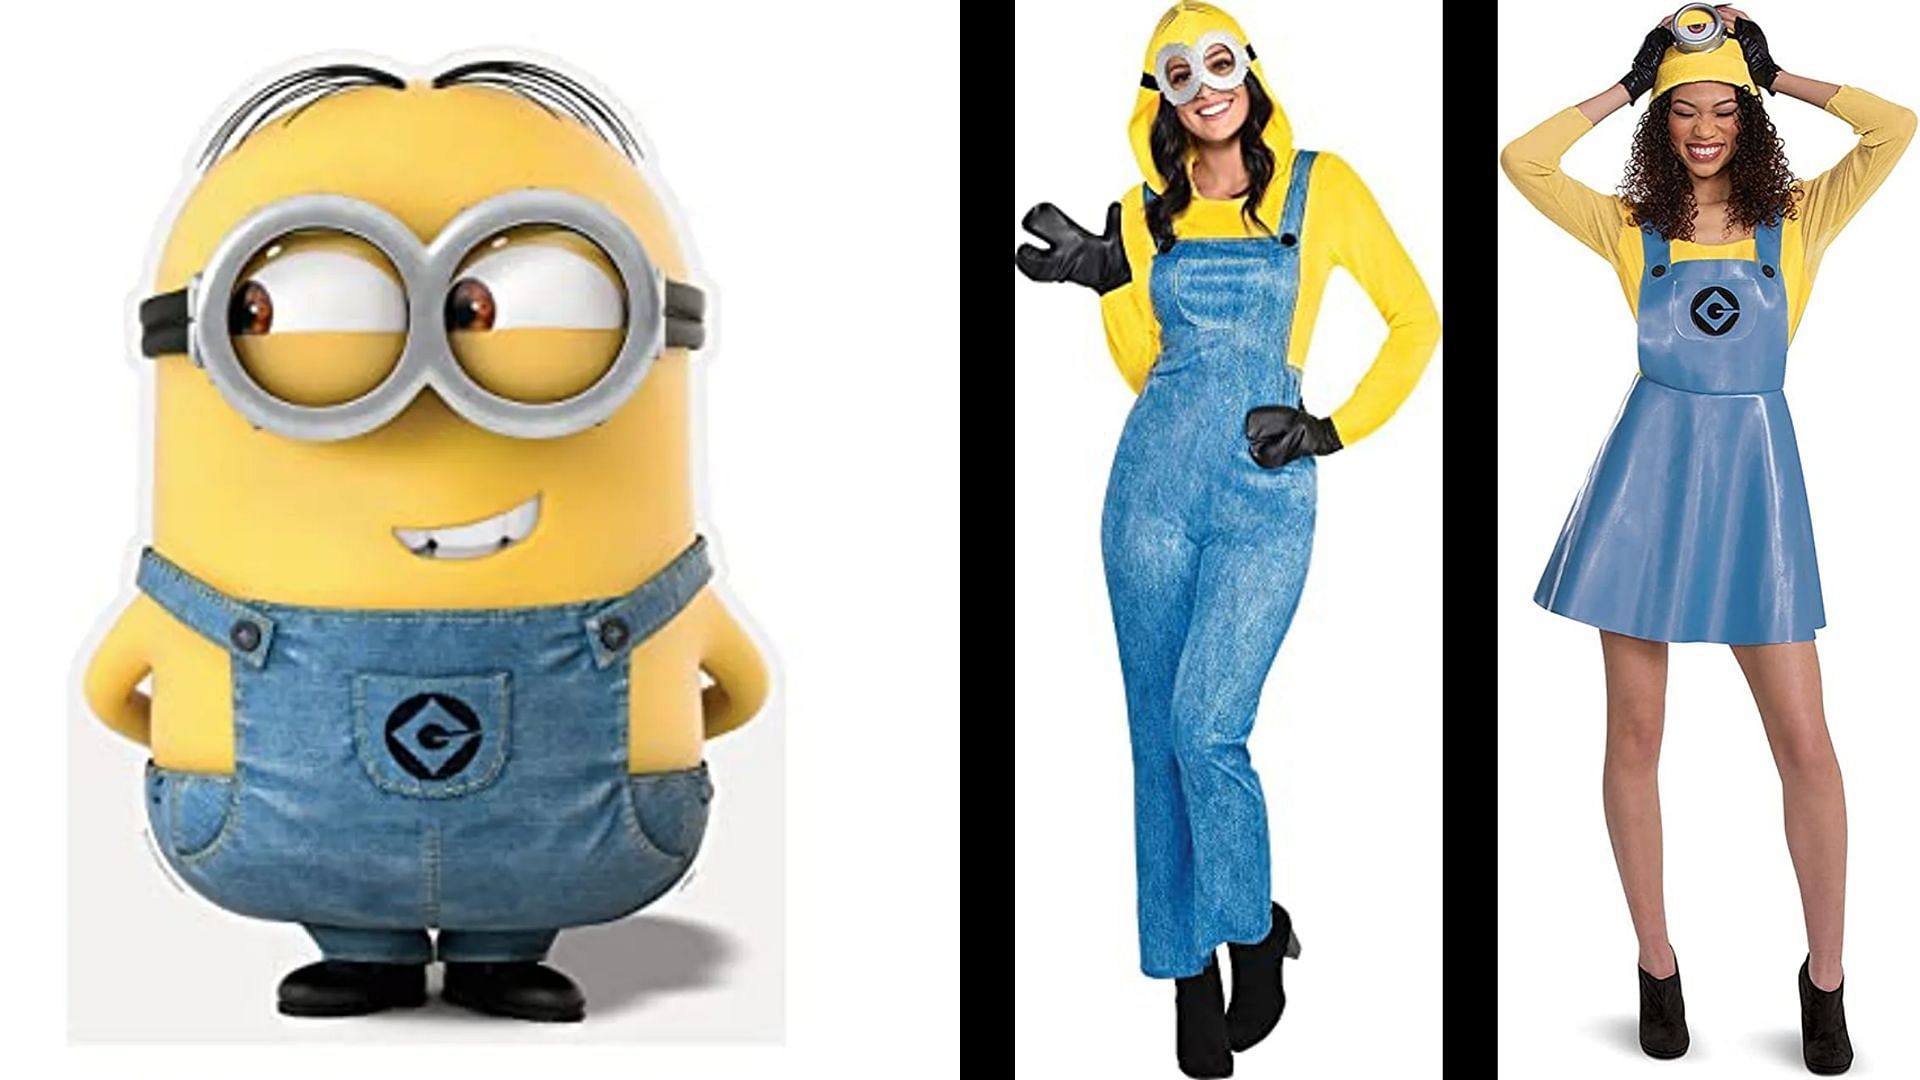 Kevin the Minion from the Minions: The Rise of Gru movie (Image via Amazon)